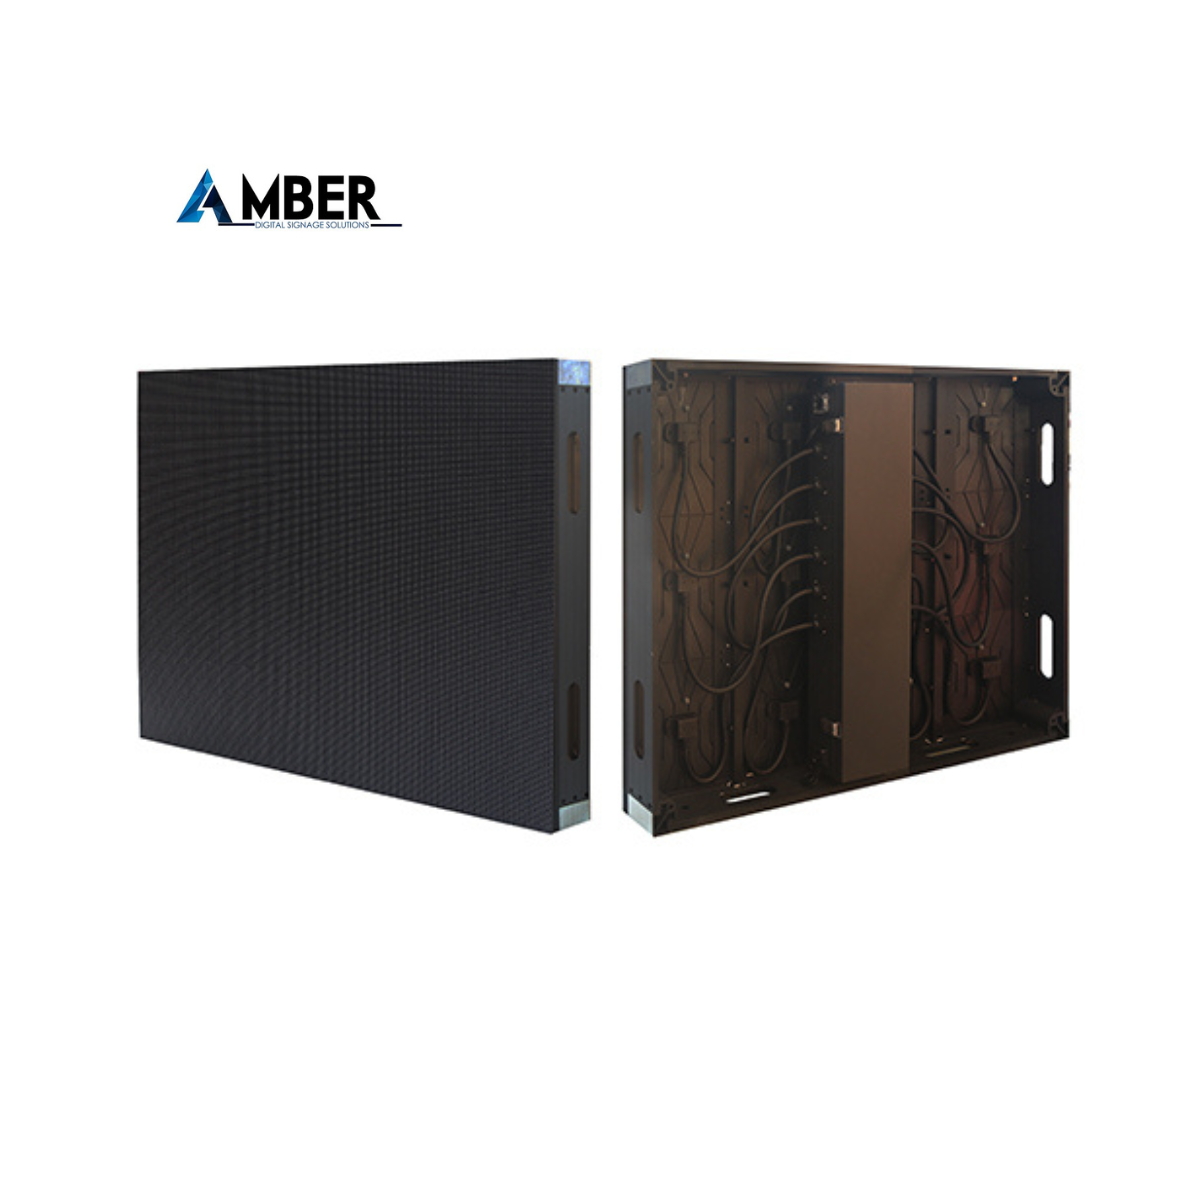 Amber BV-OF Fine Pitch Outdoor LED Wall Fixed Install Series